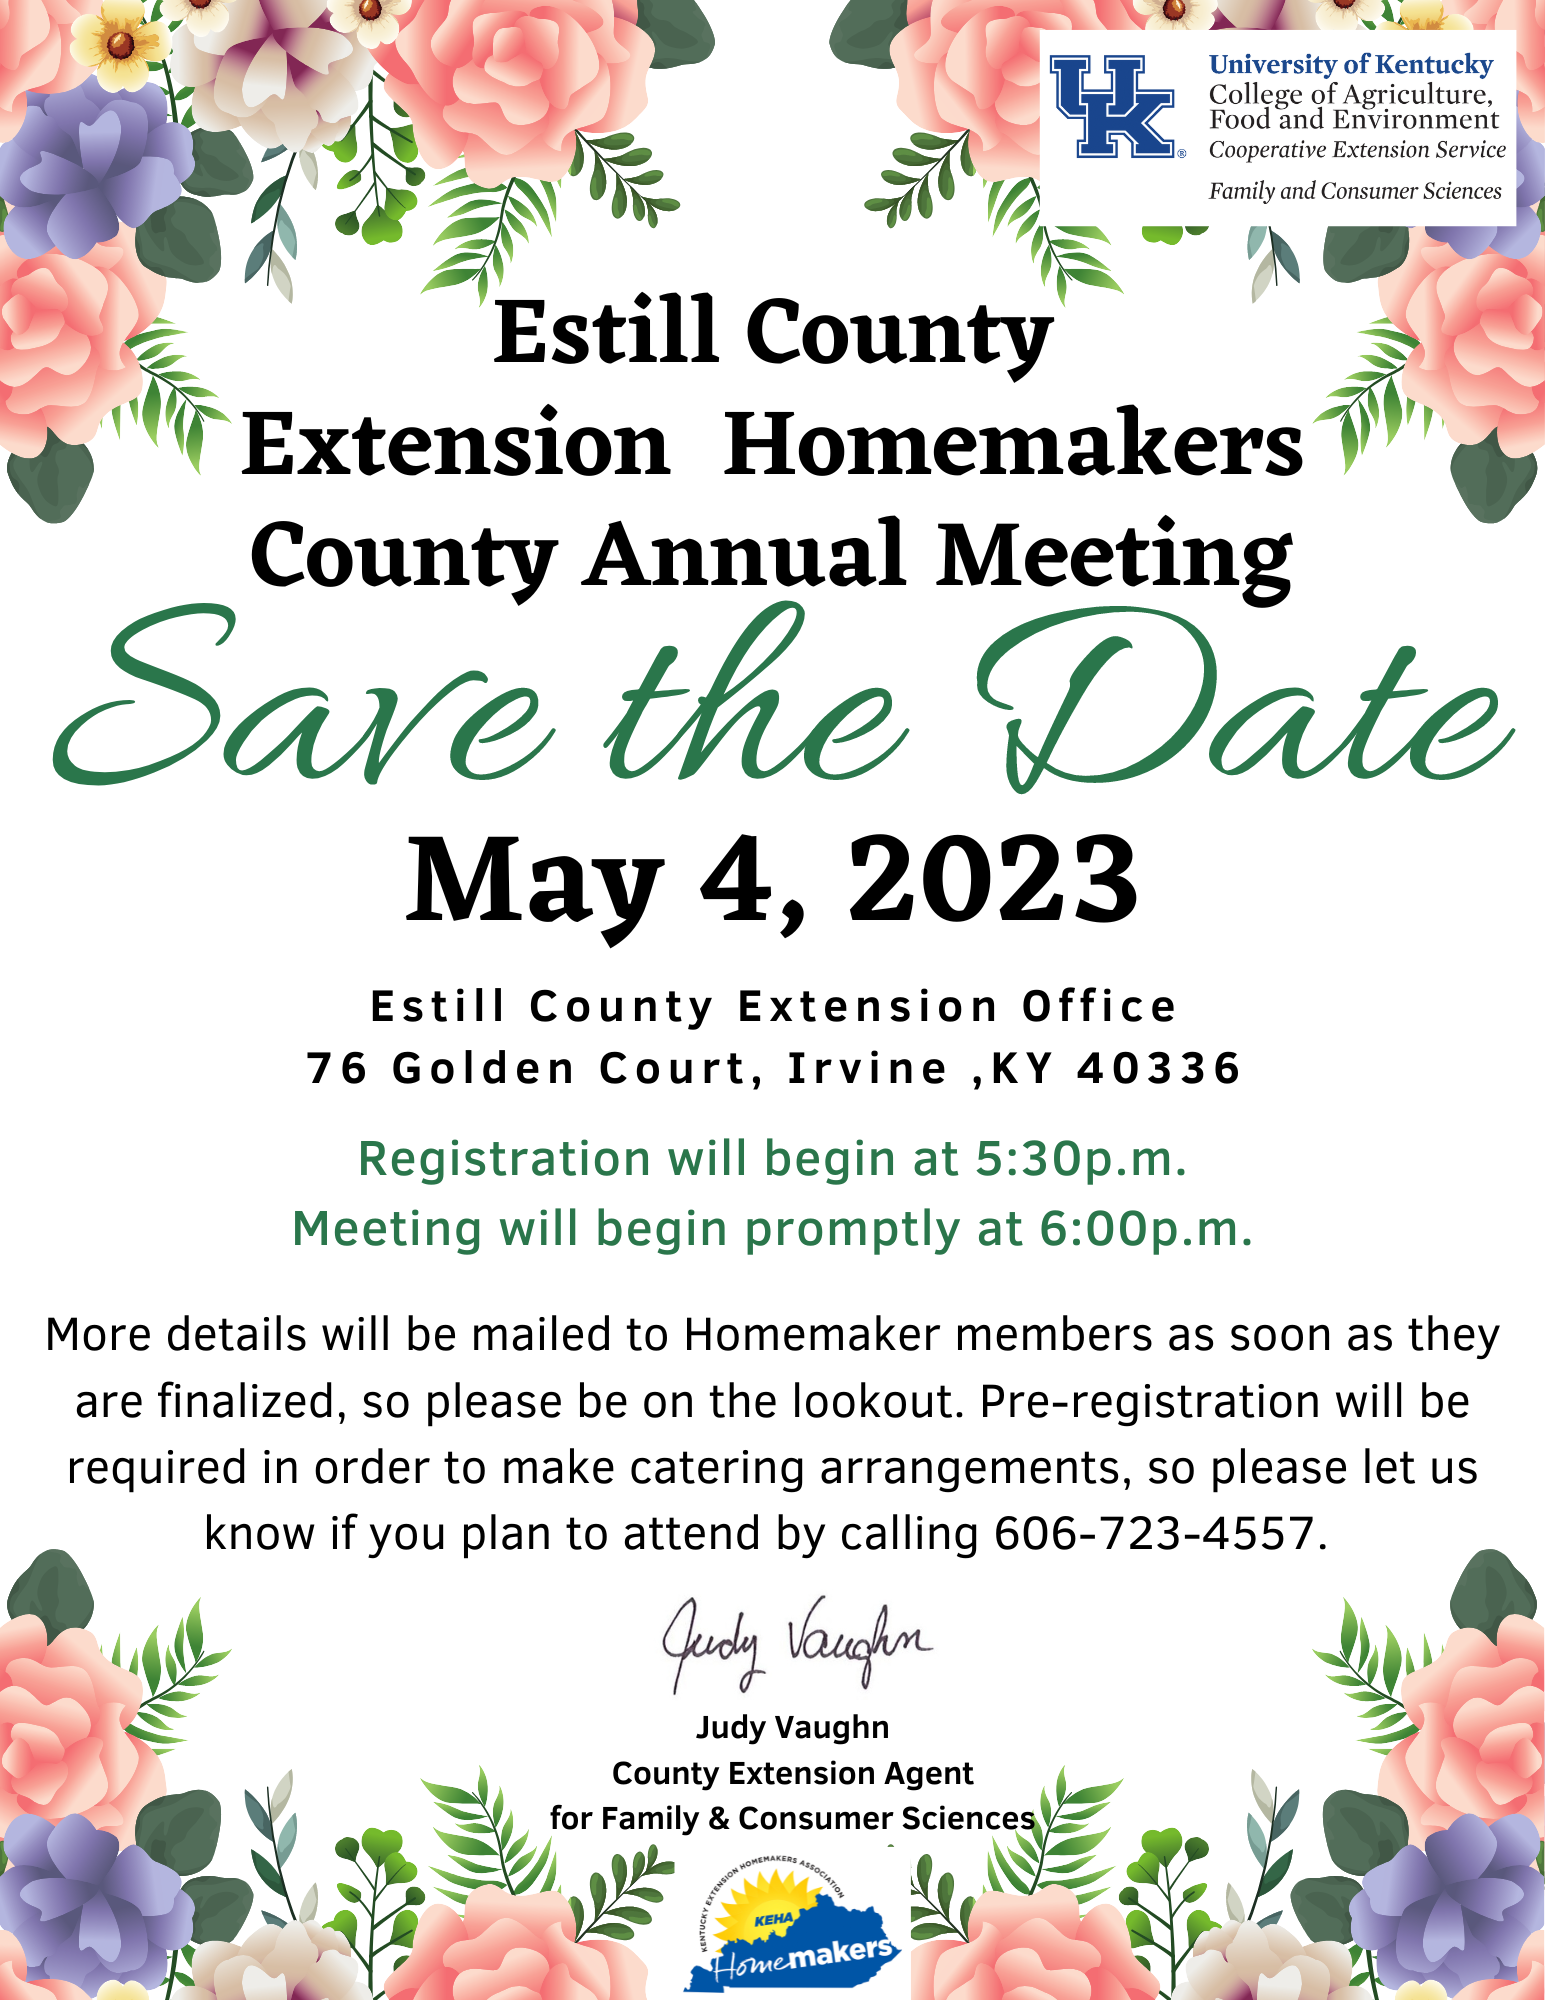 Save the Date Extension Homemaker County Annual Meeting Flyer